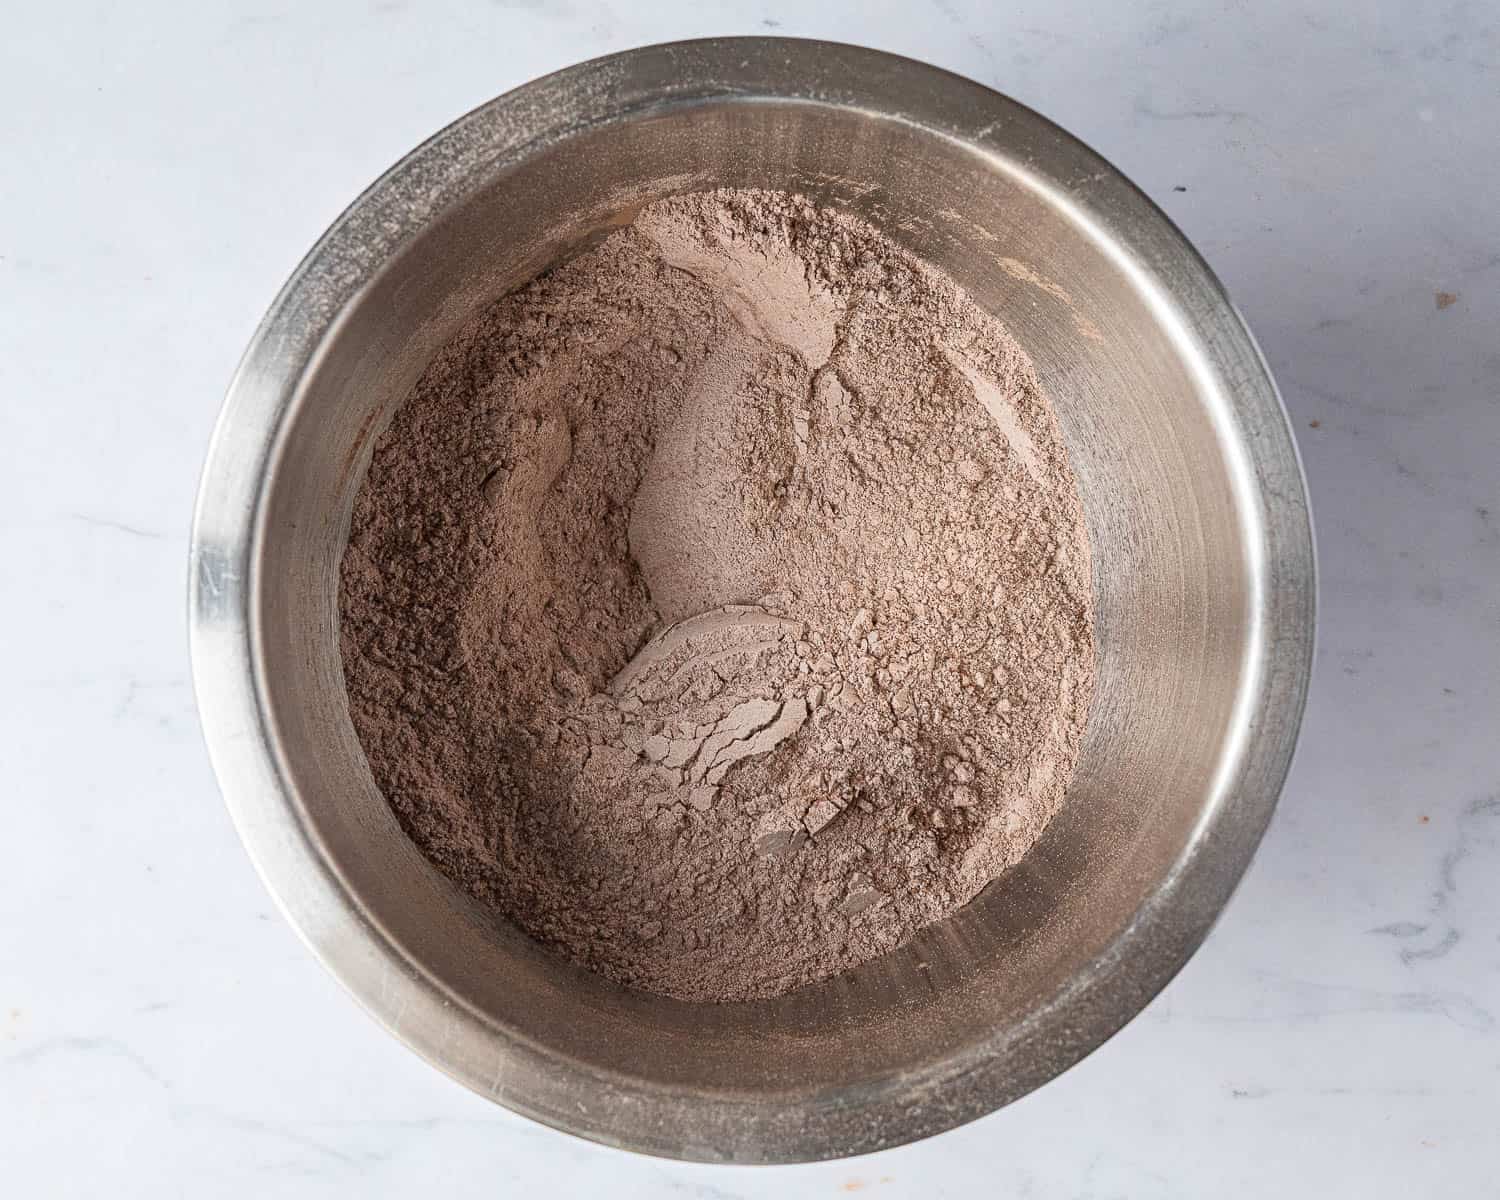 The sifted flour and cocoa powder.